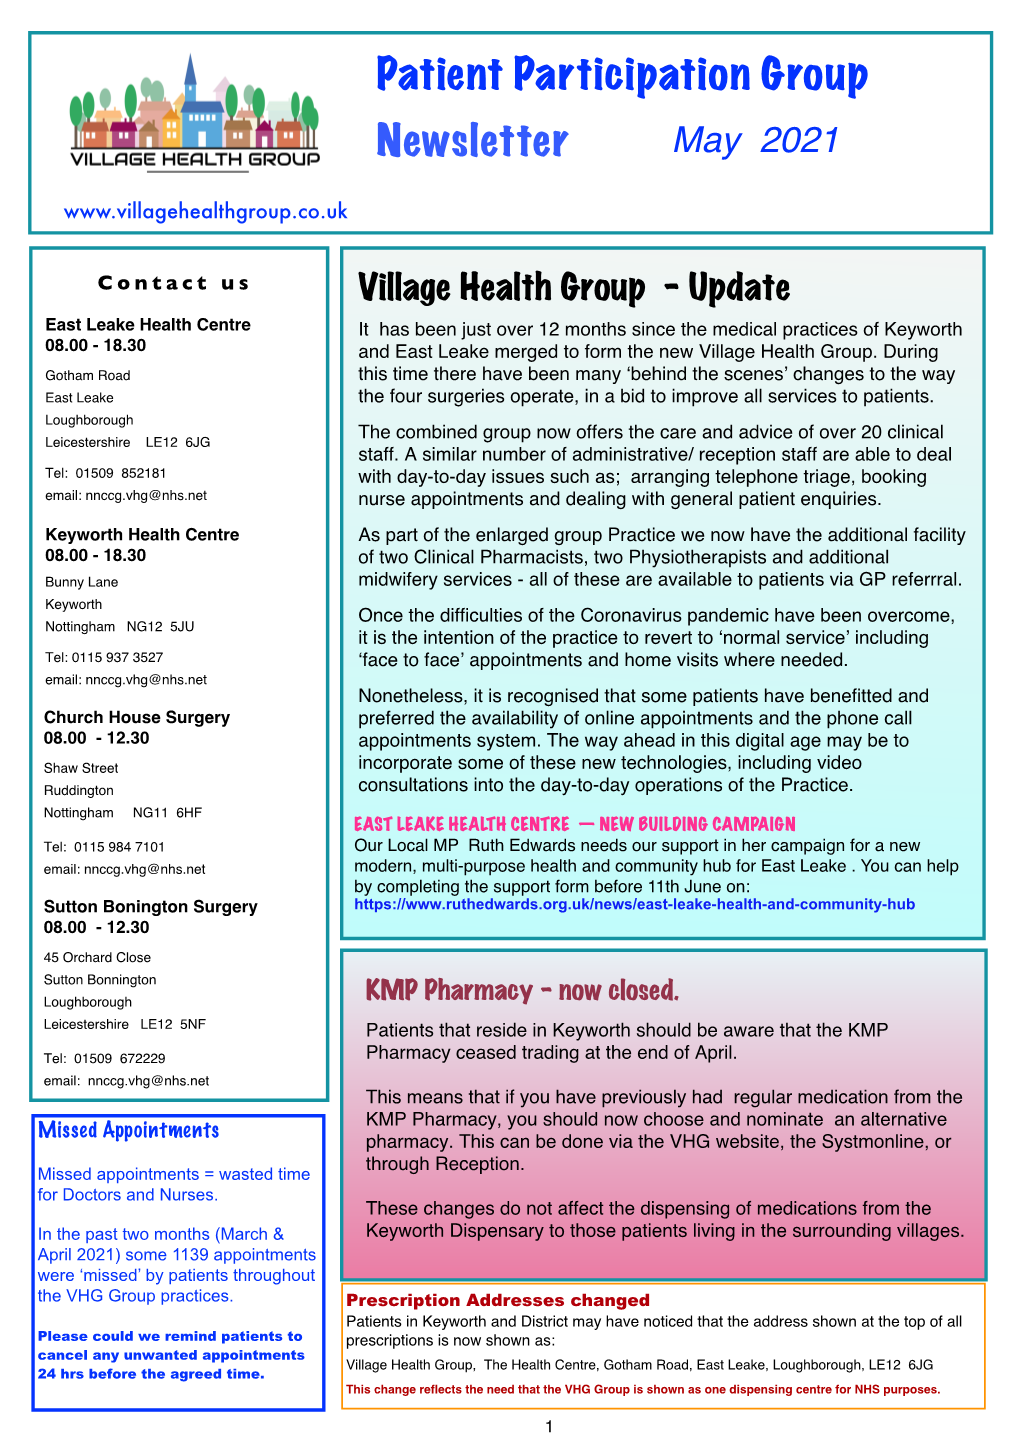 Patient Participation Group Newsletter May 2021